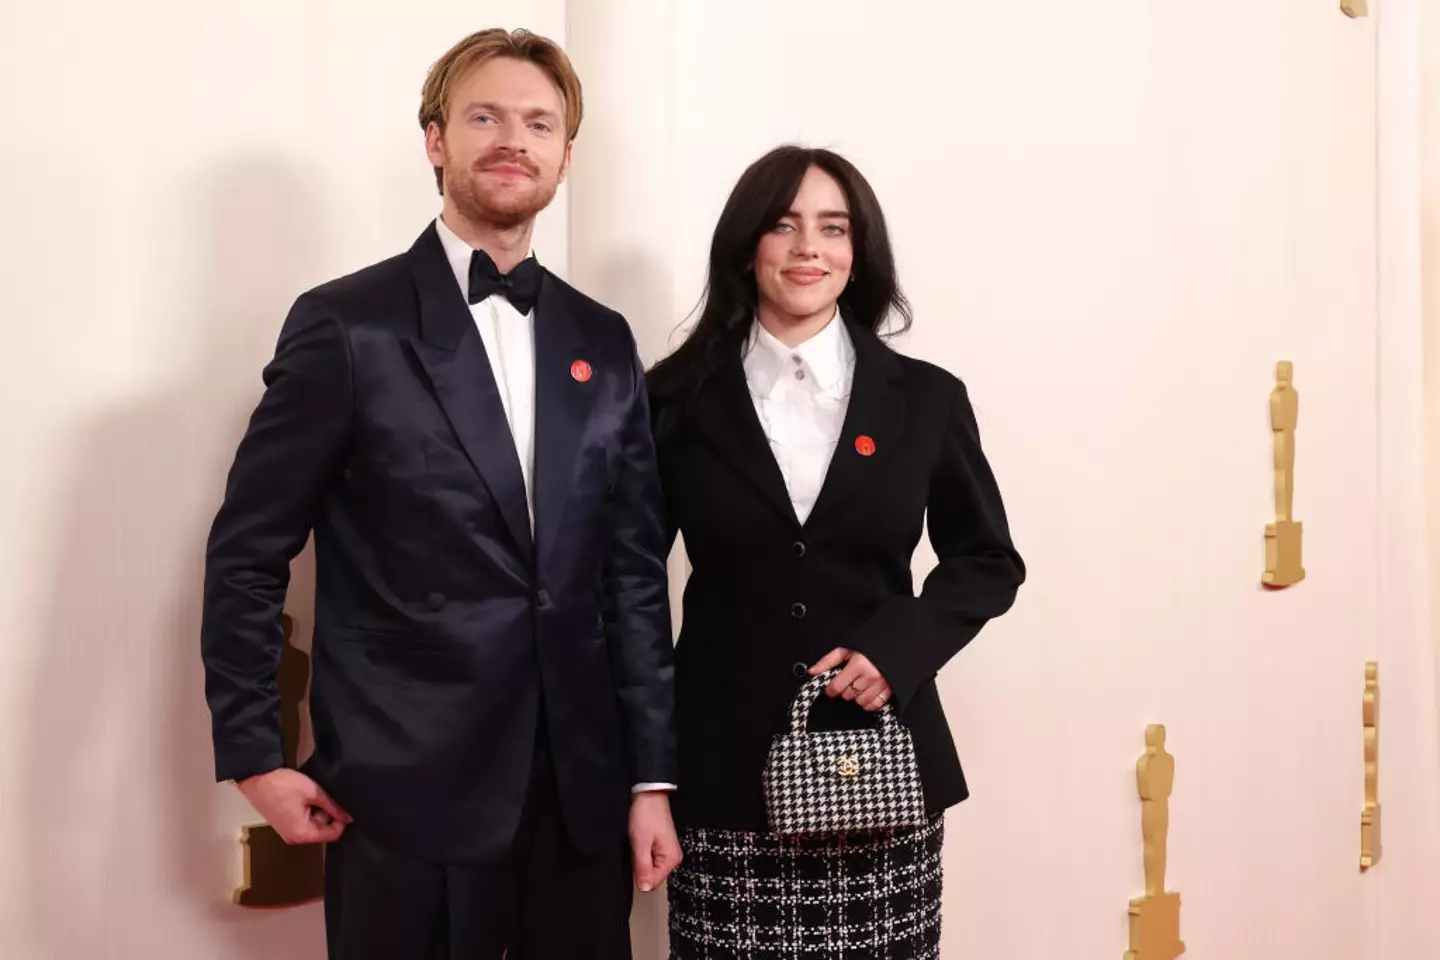 Finneas O'Connell and Billie Eilish are facing nepo baby allegations. (JC Olivera/Getty Images)